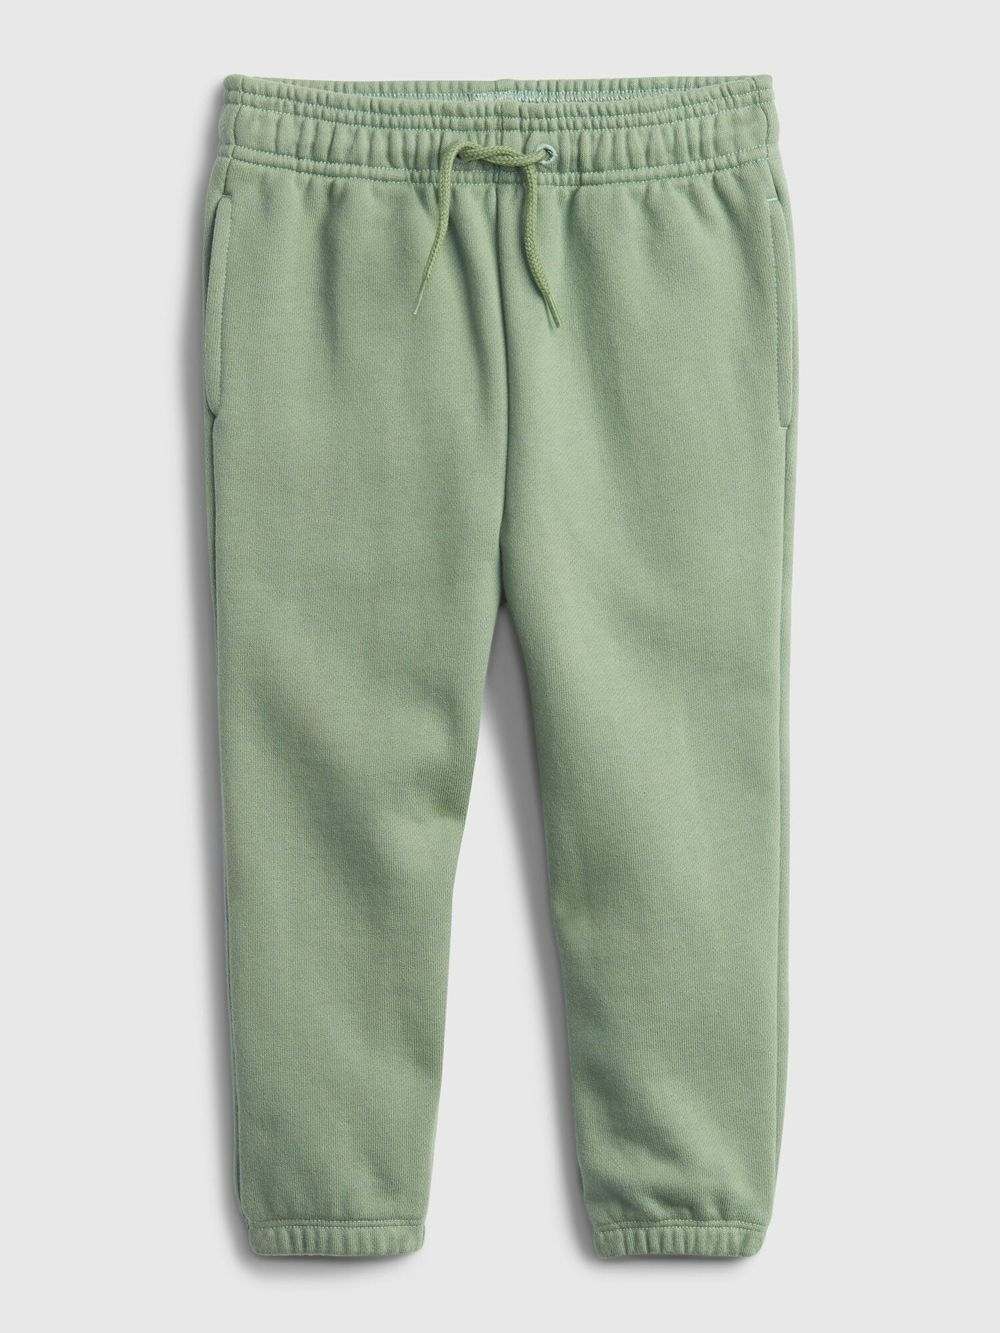 These cosy joggers are perfect